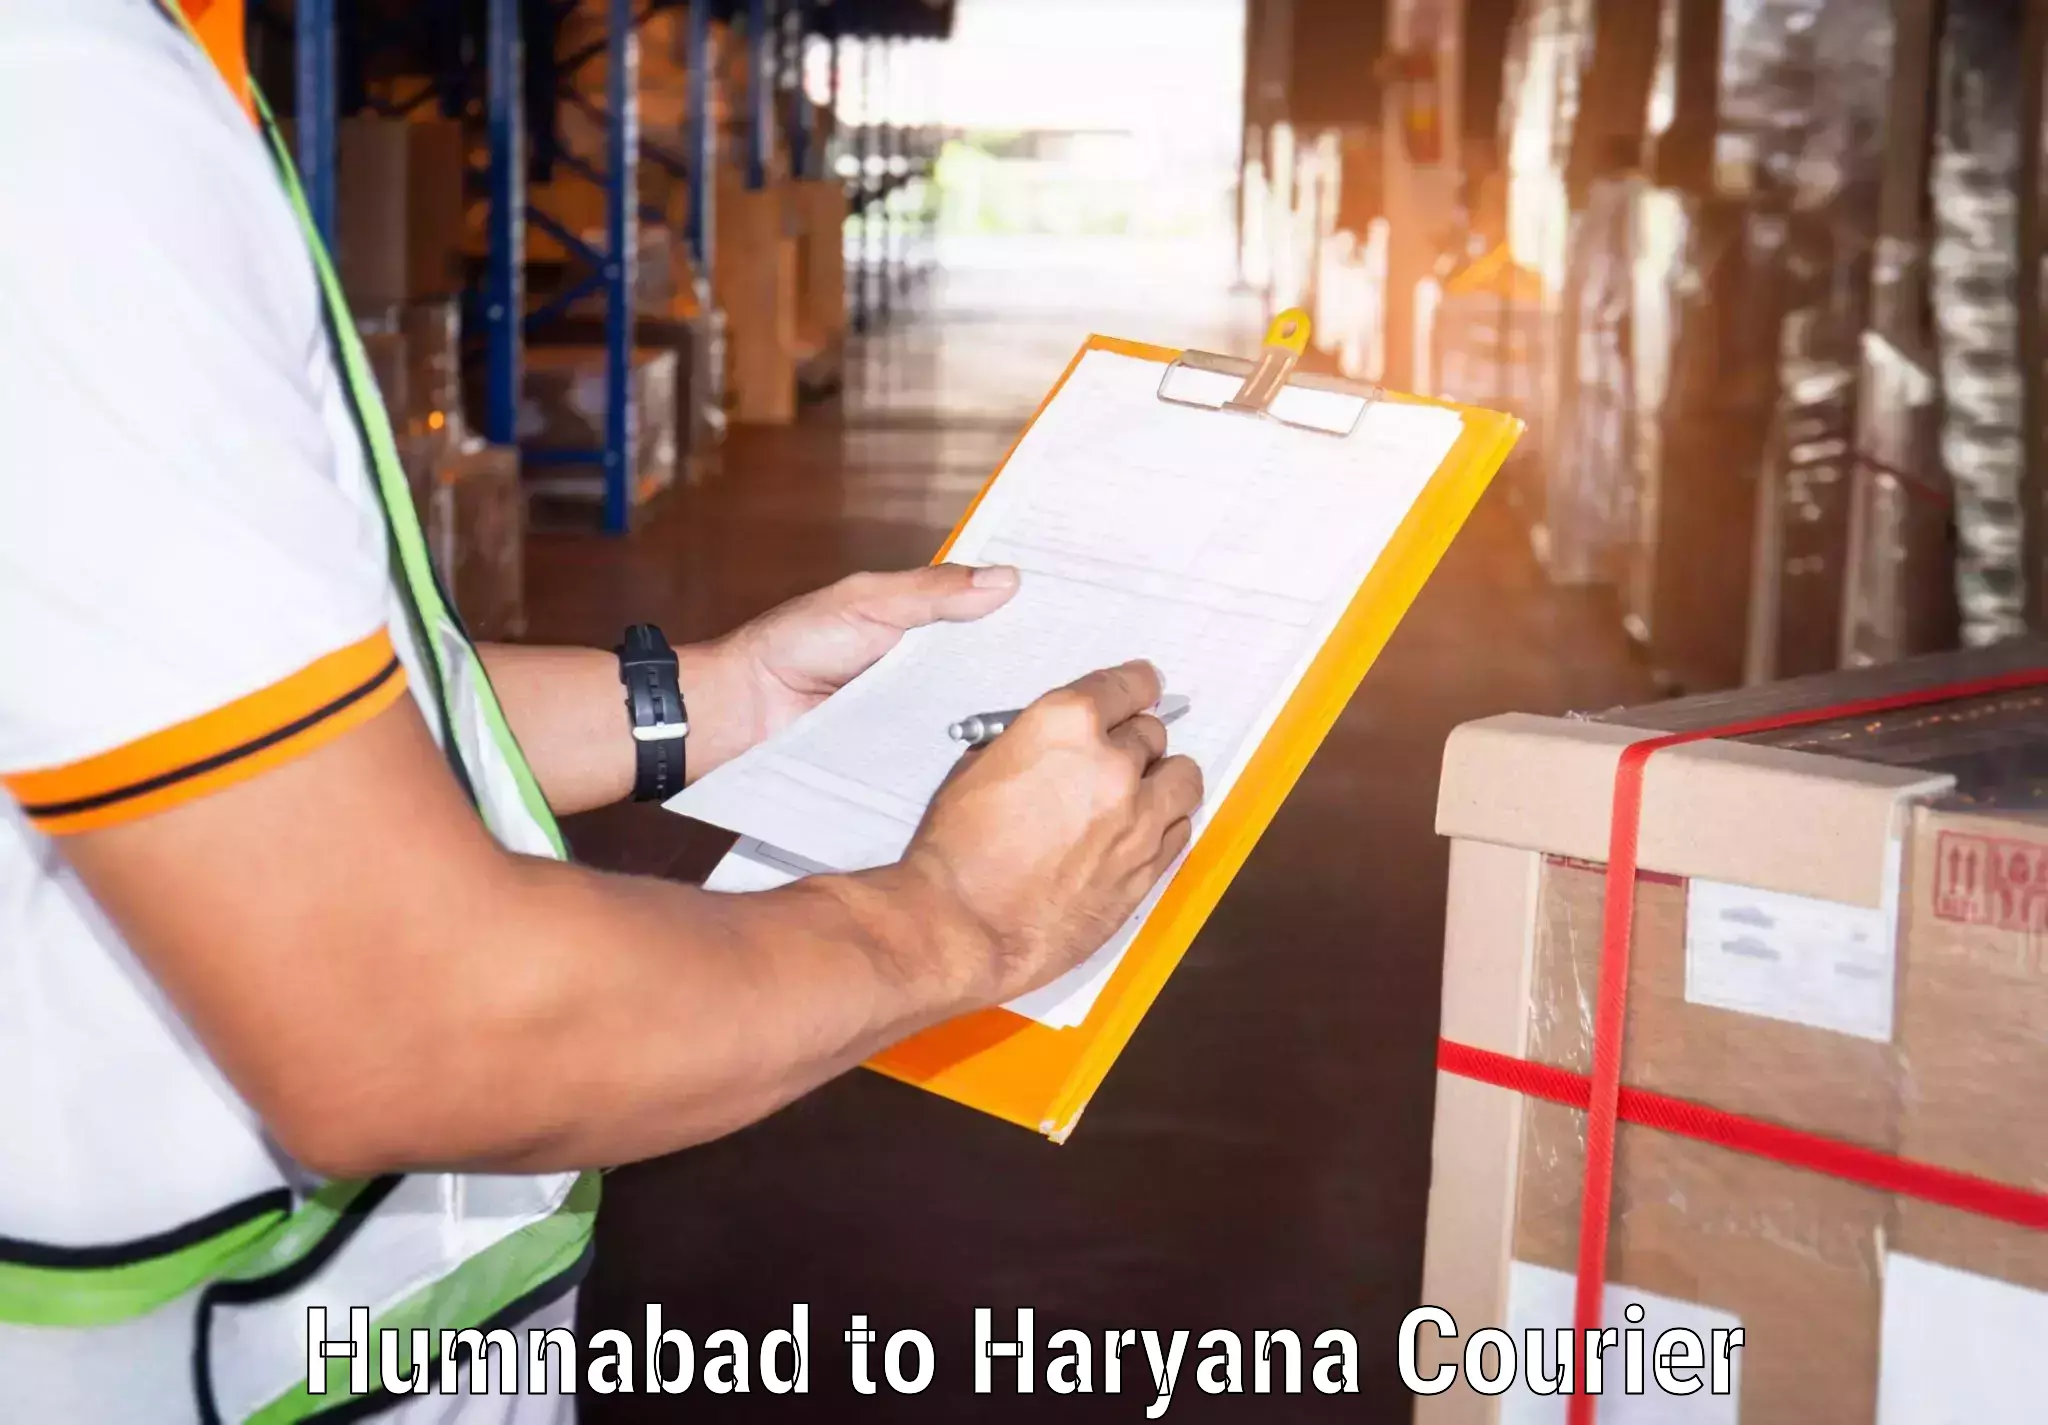 Express logistics in Humnabad to Haryana